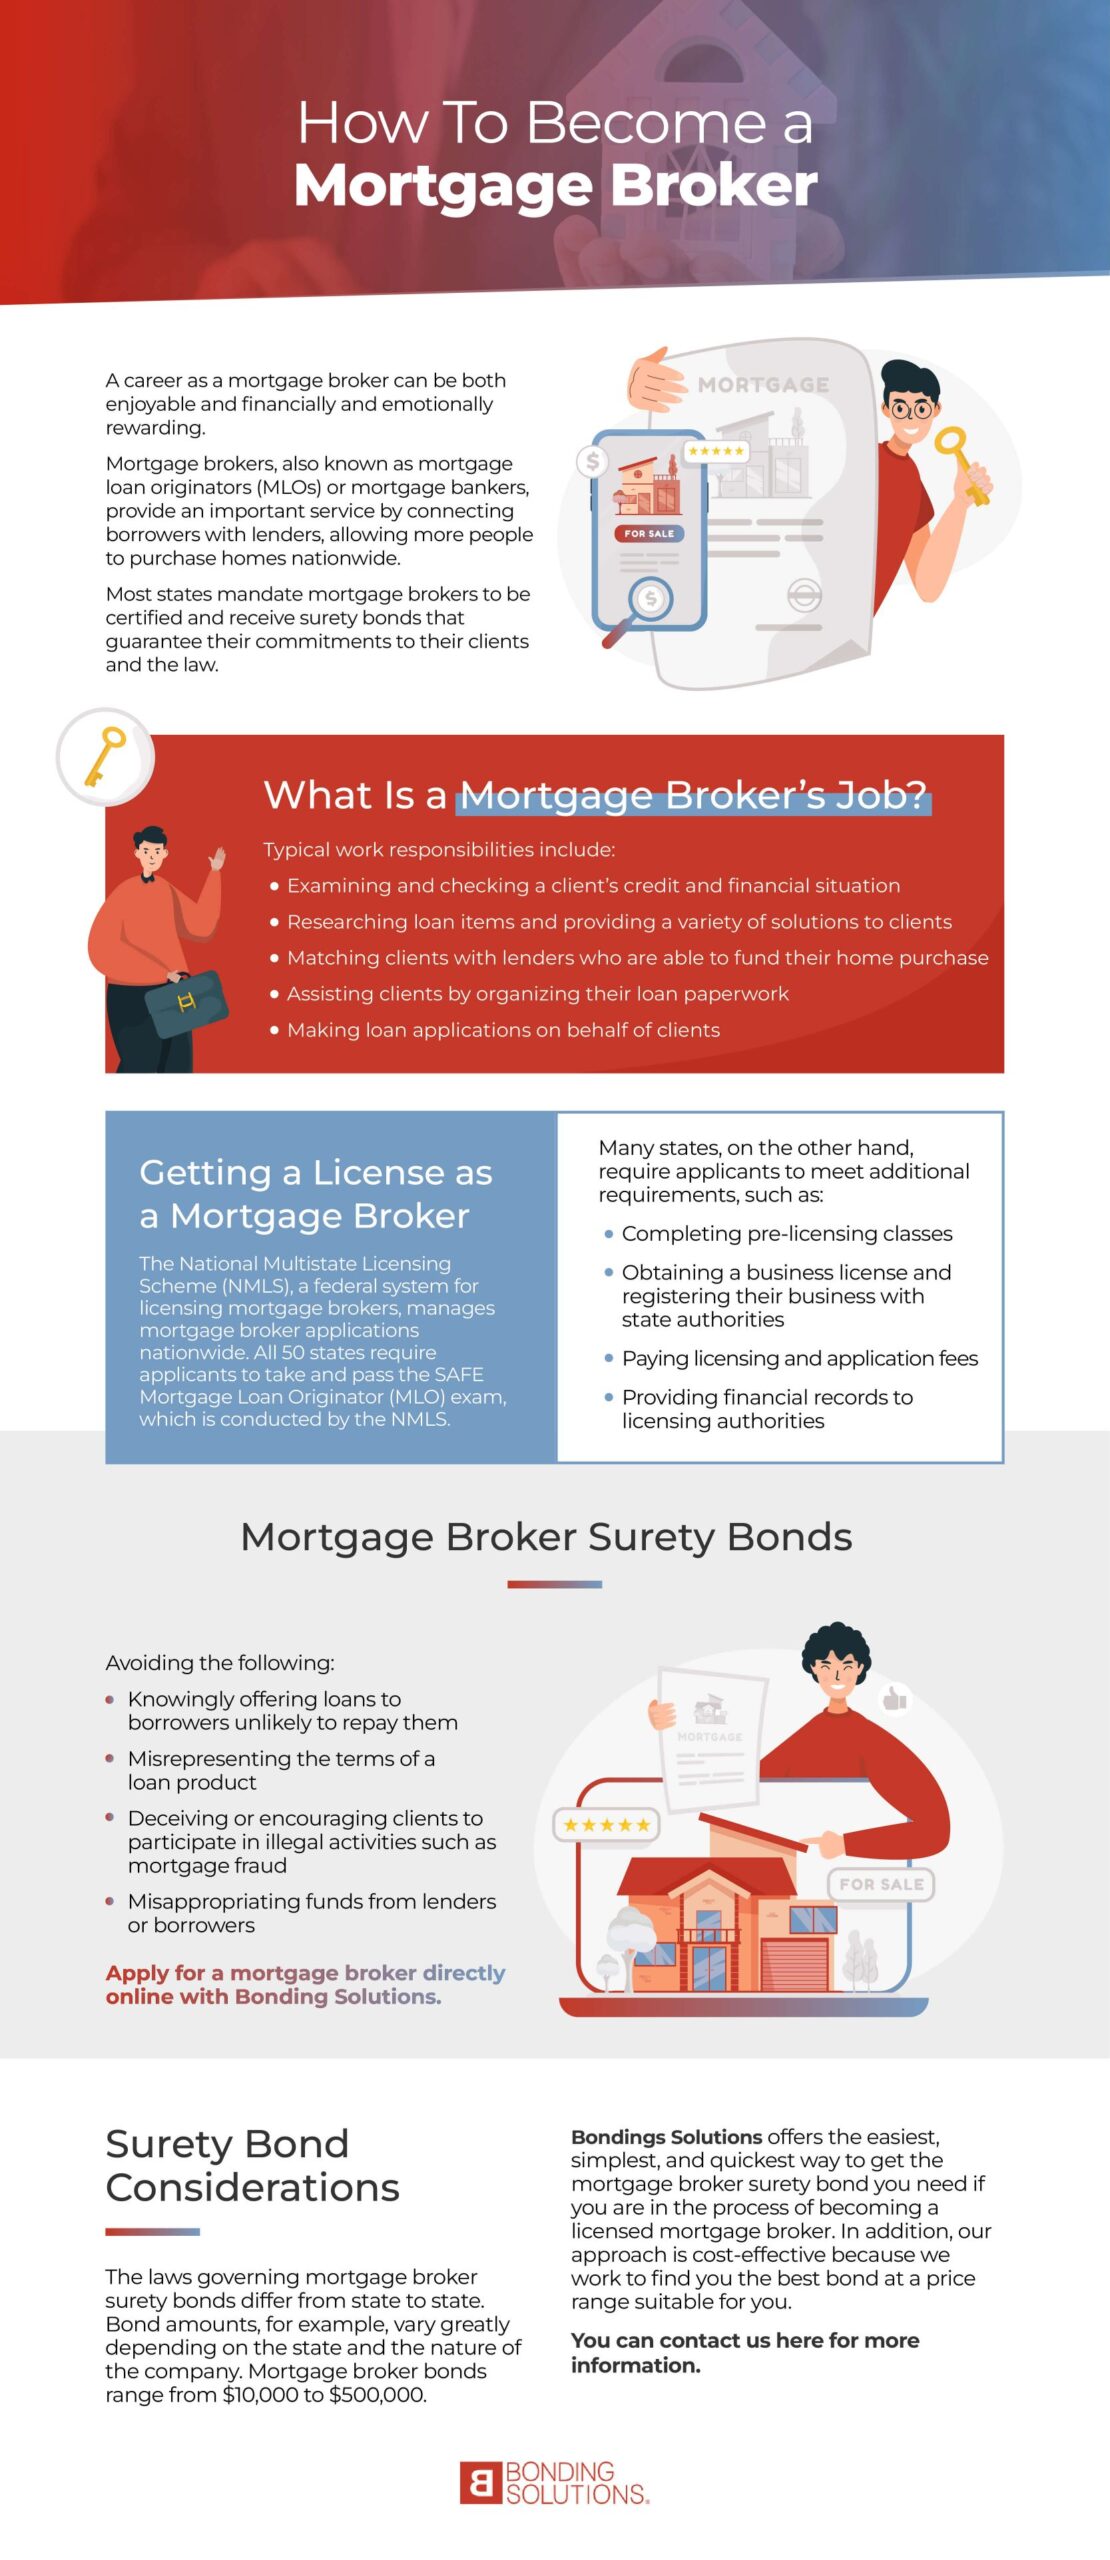 Bonding Solutions | How To Become a Mortgage Broker